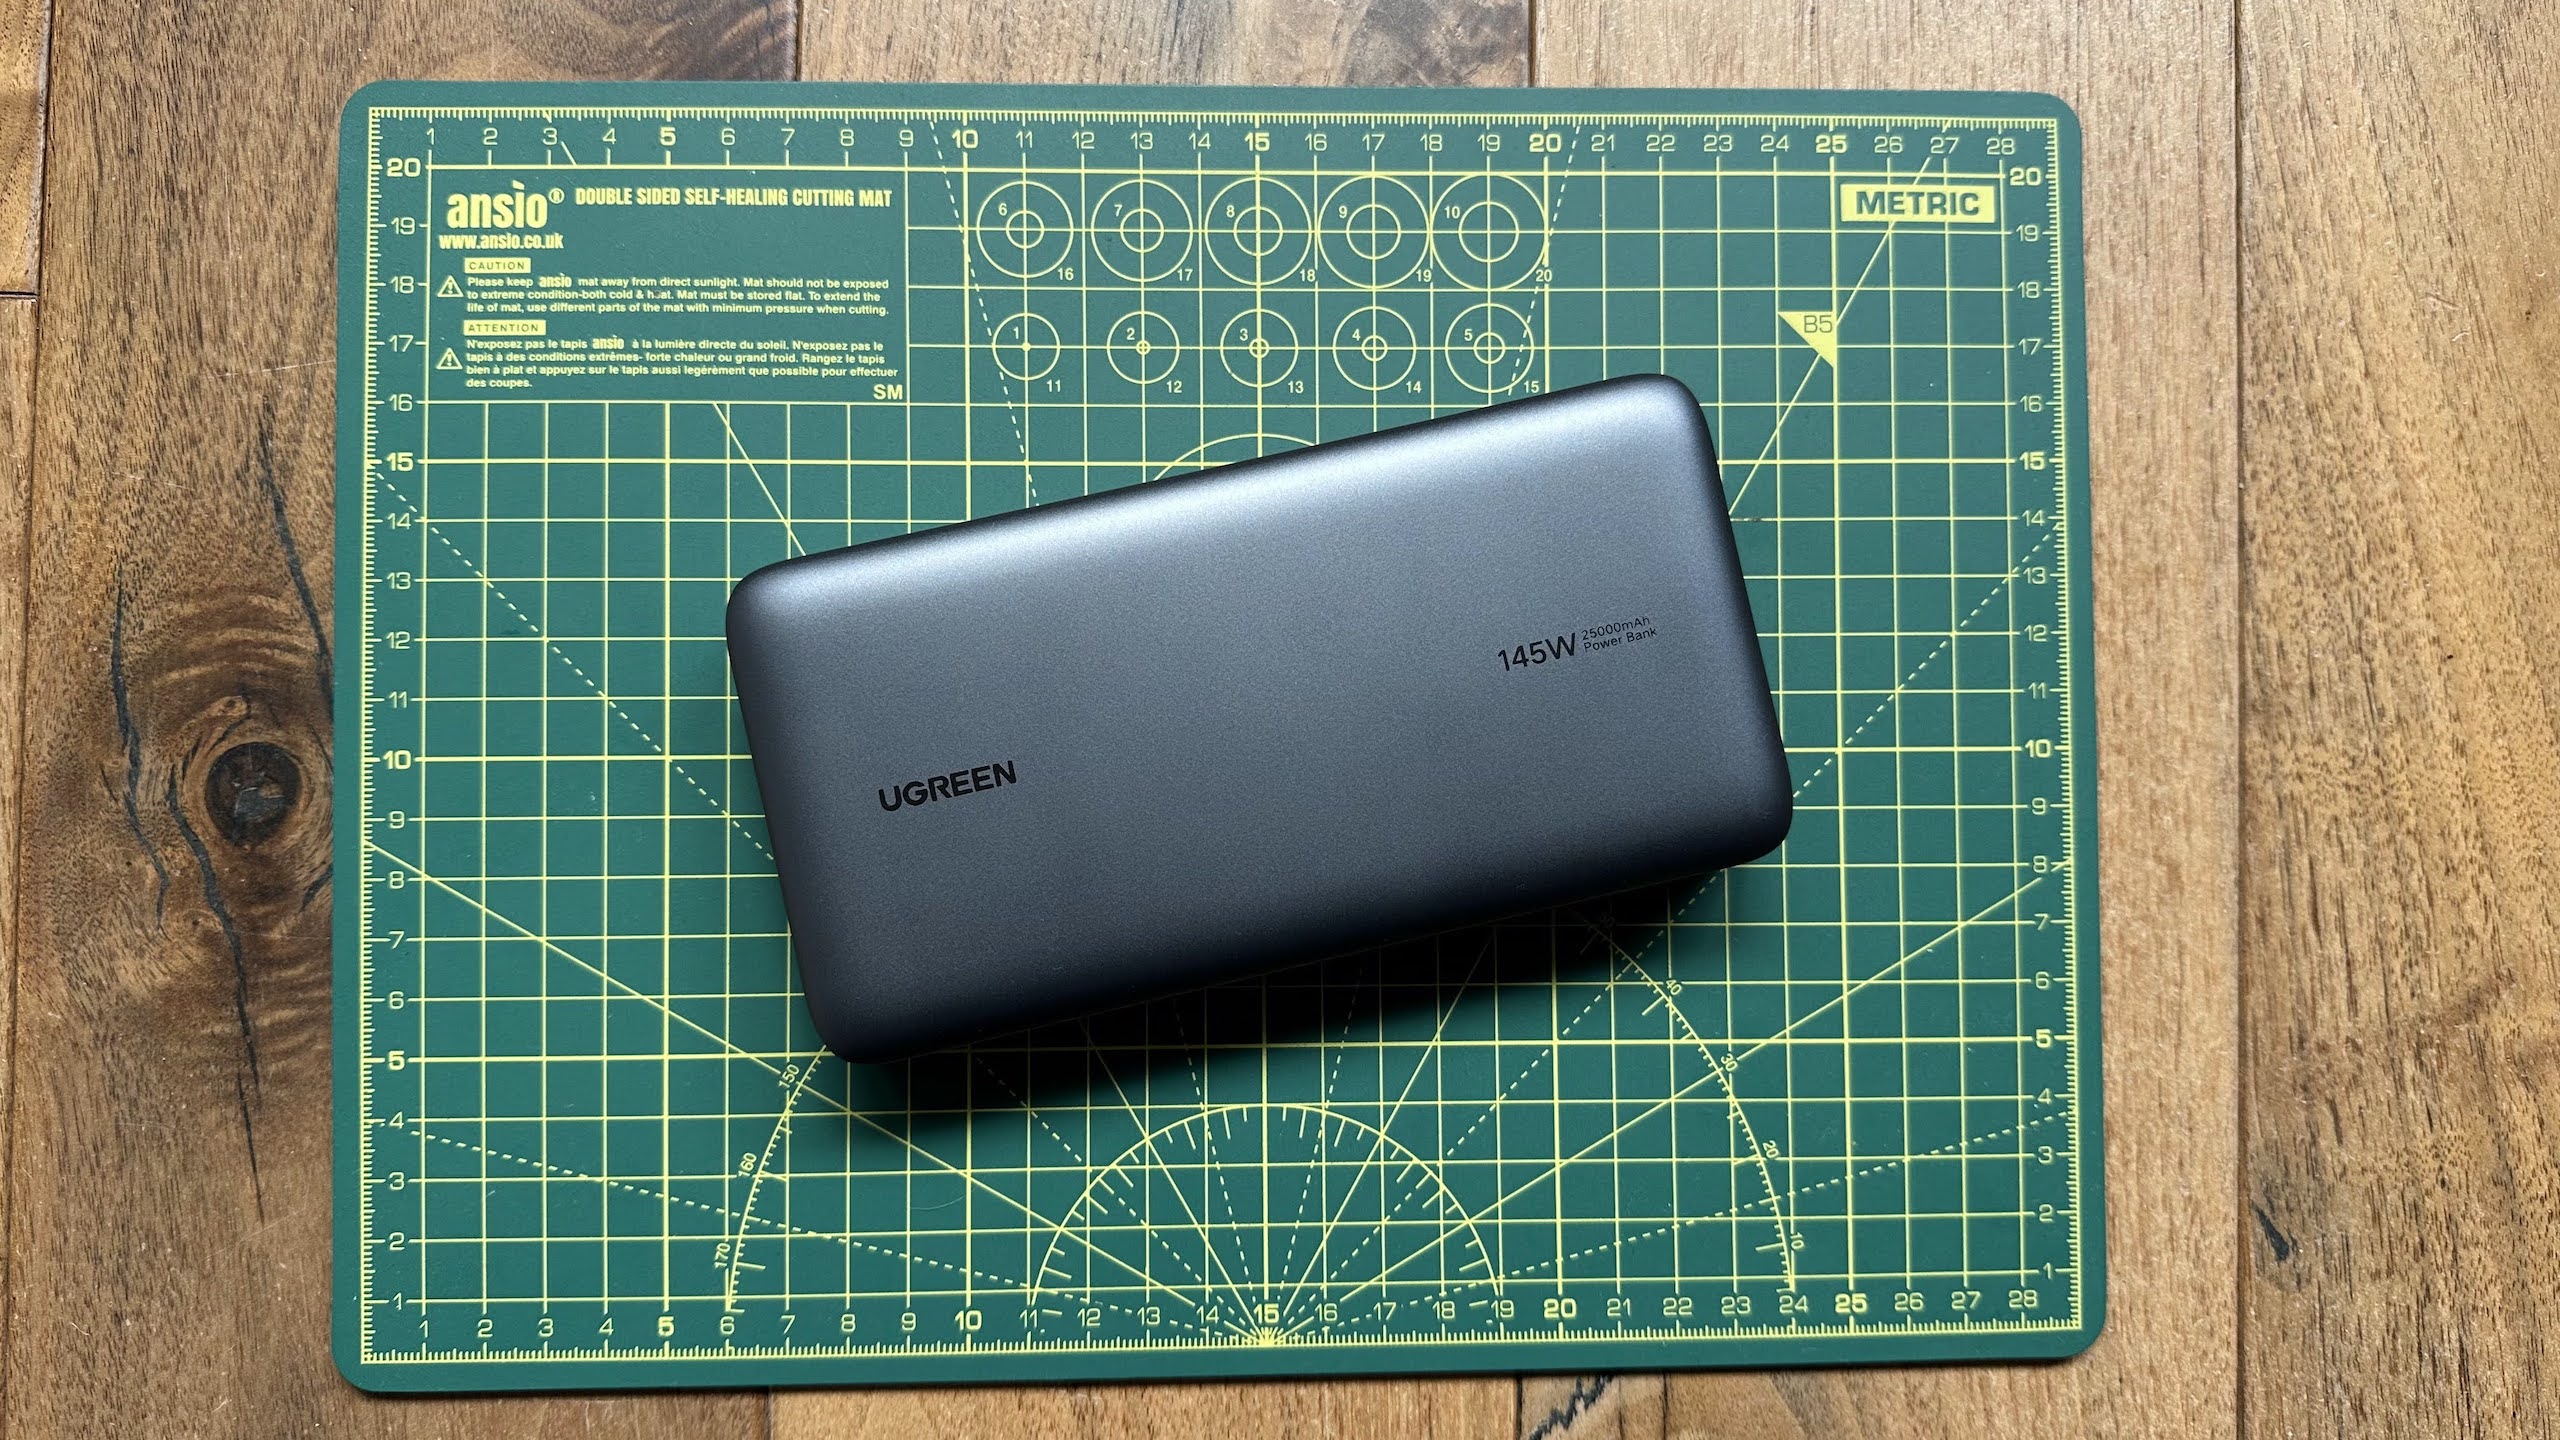 RAVPOWER 5,000mAh Magnetic Wireless Power Bank hands-on and review -   News